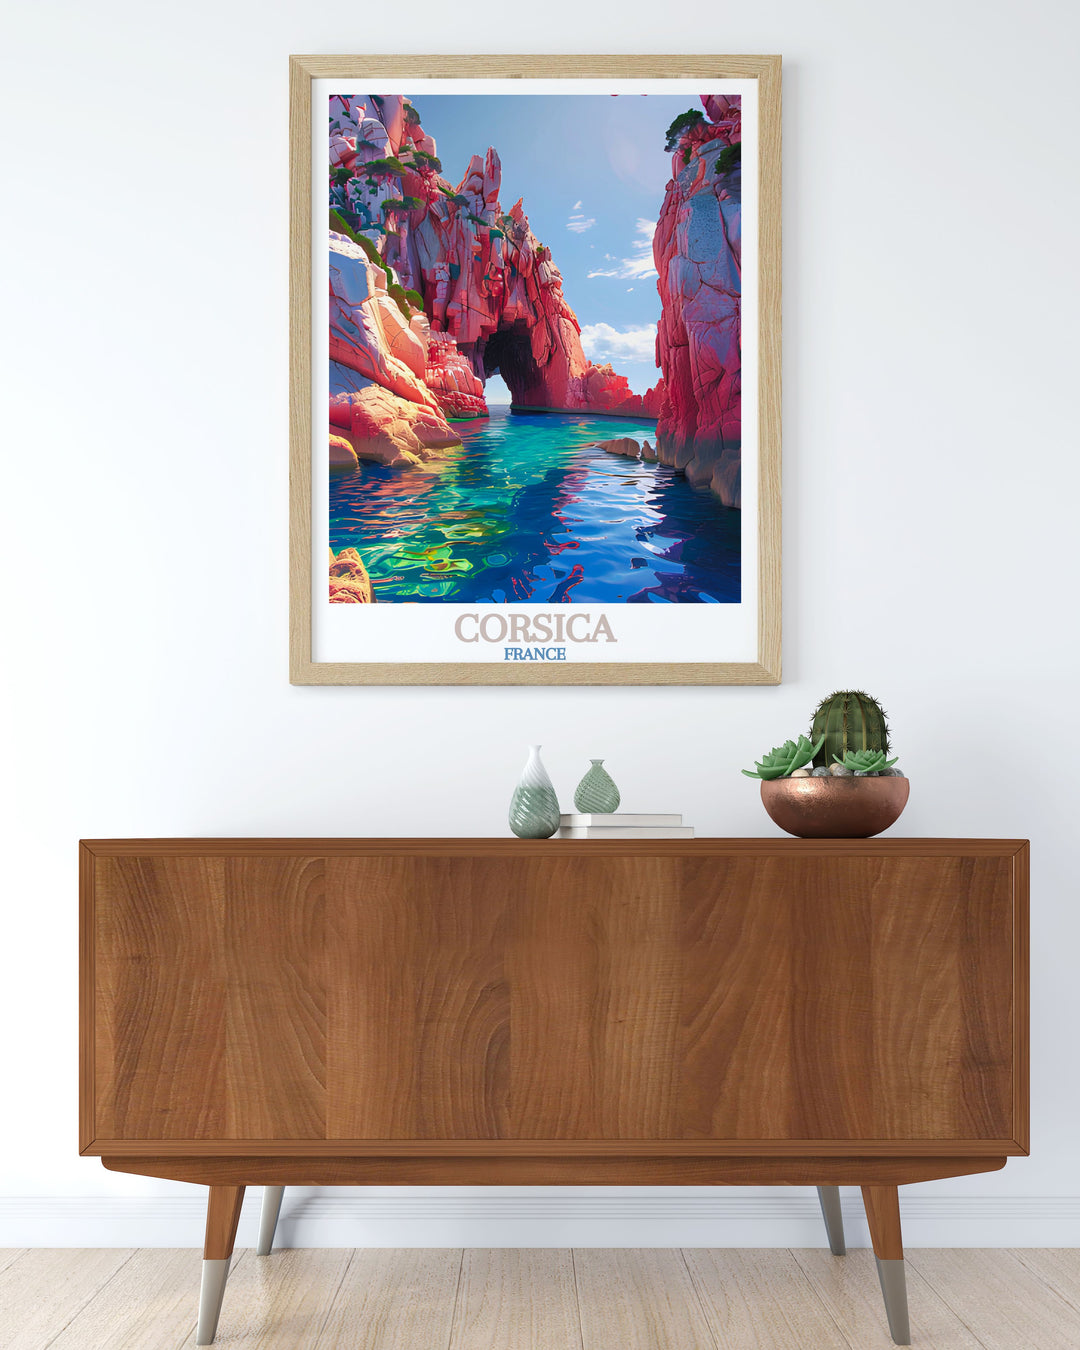 Beautiful Calanques de Piana travel poster showcasing the dramatic cliffs and turquoise waters of Corsica France ideal for art collectors and those who appreciate fine art prints perfect for enhancing your living room decor